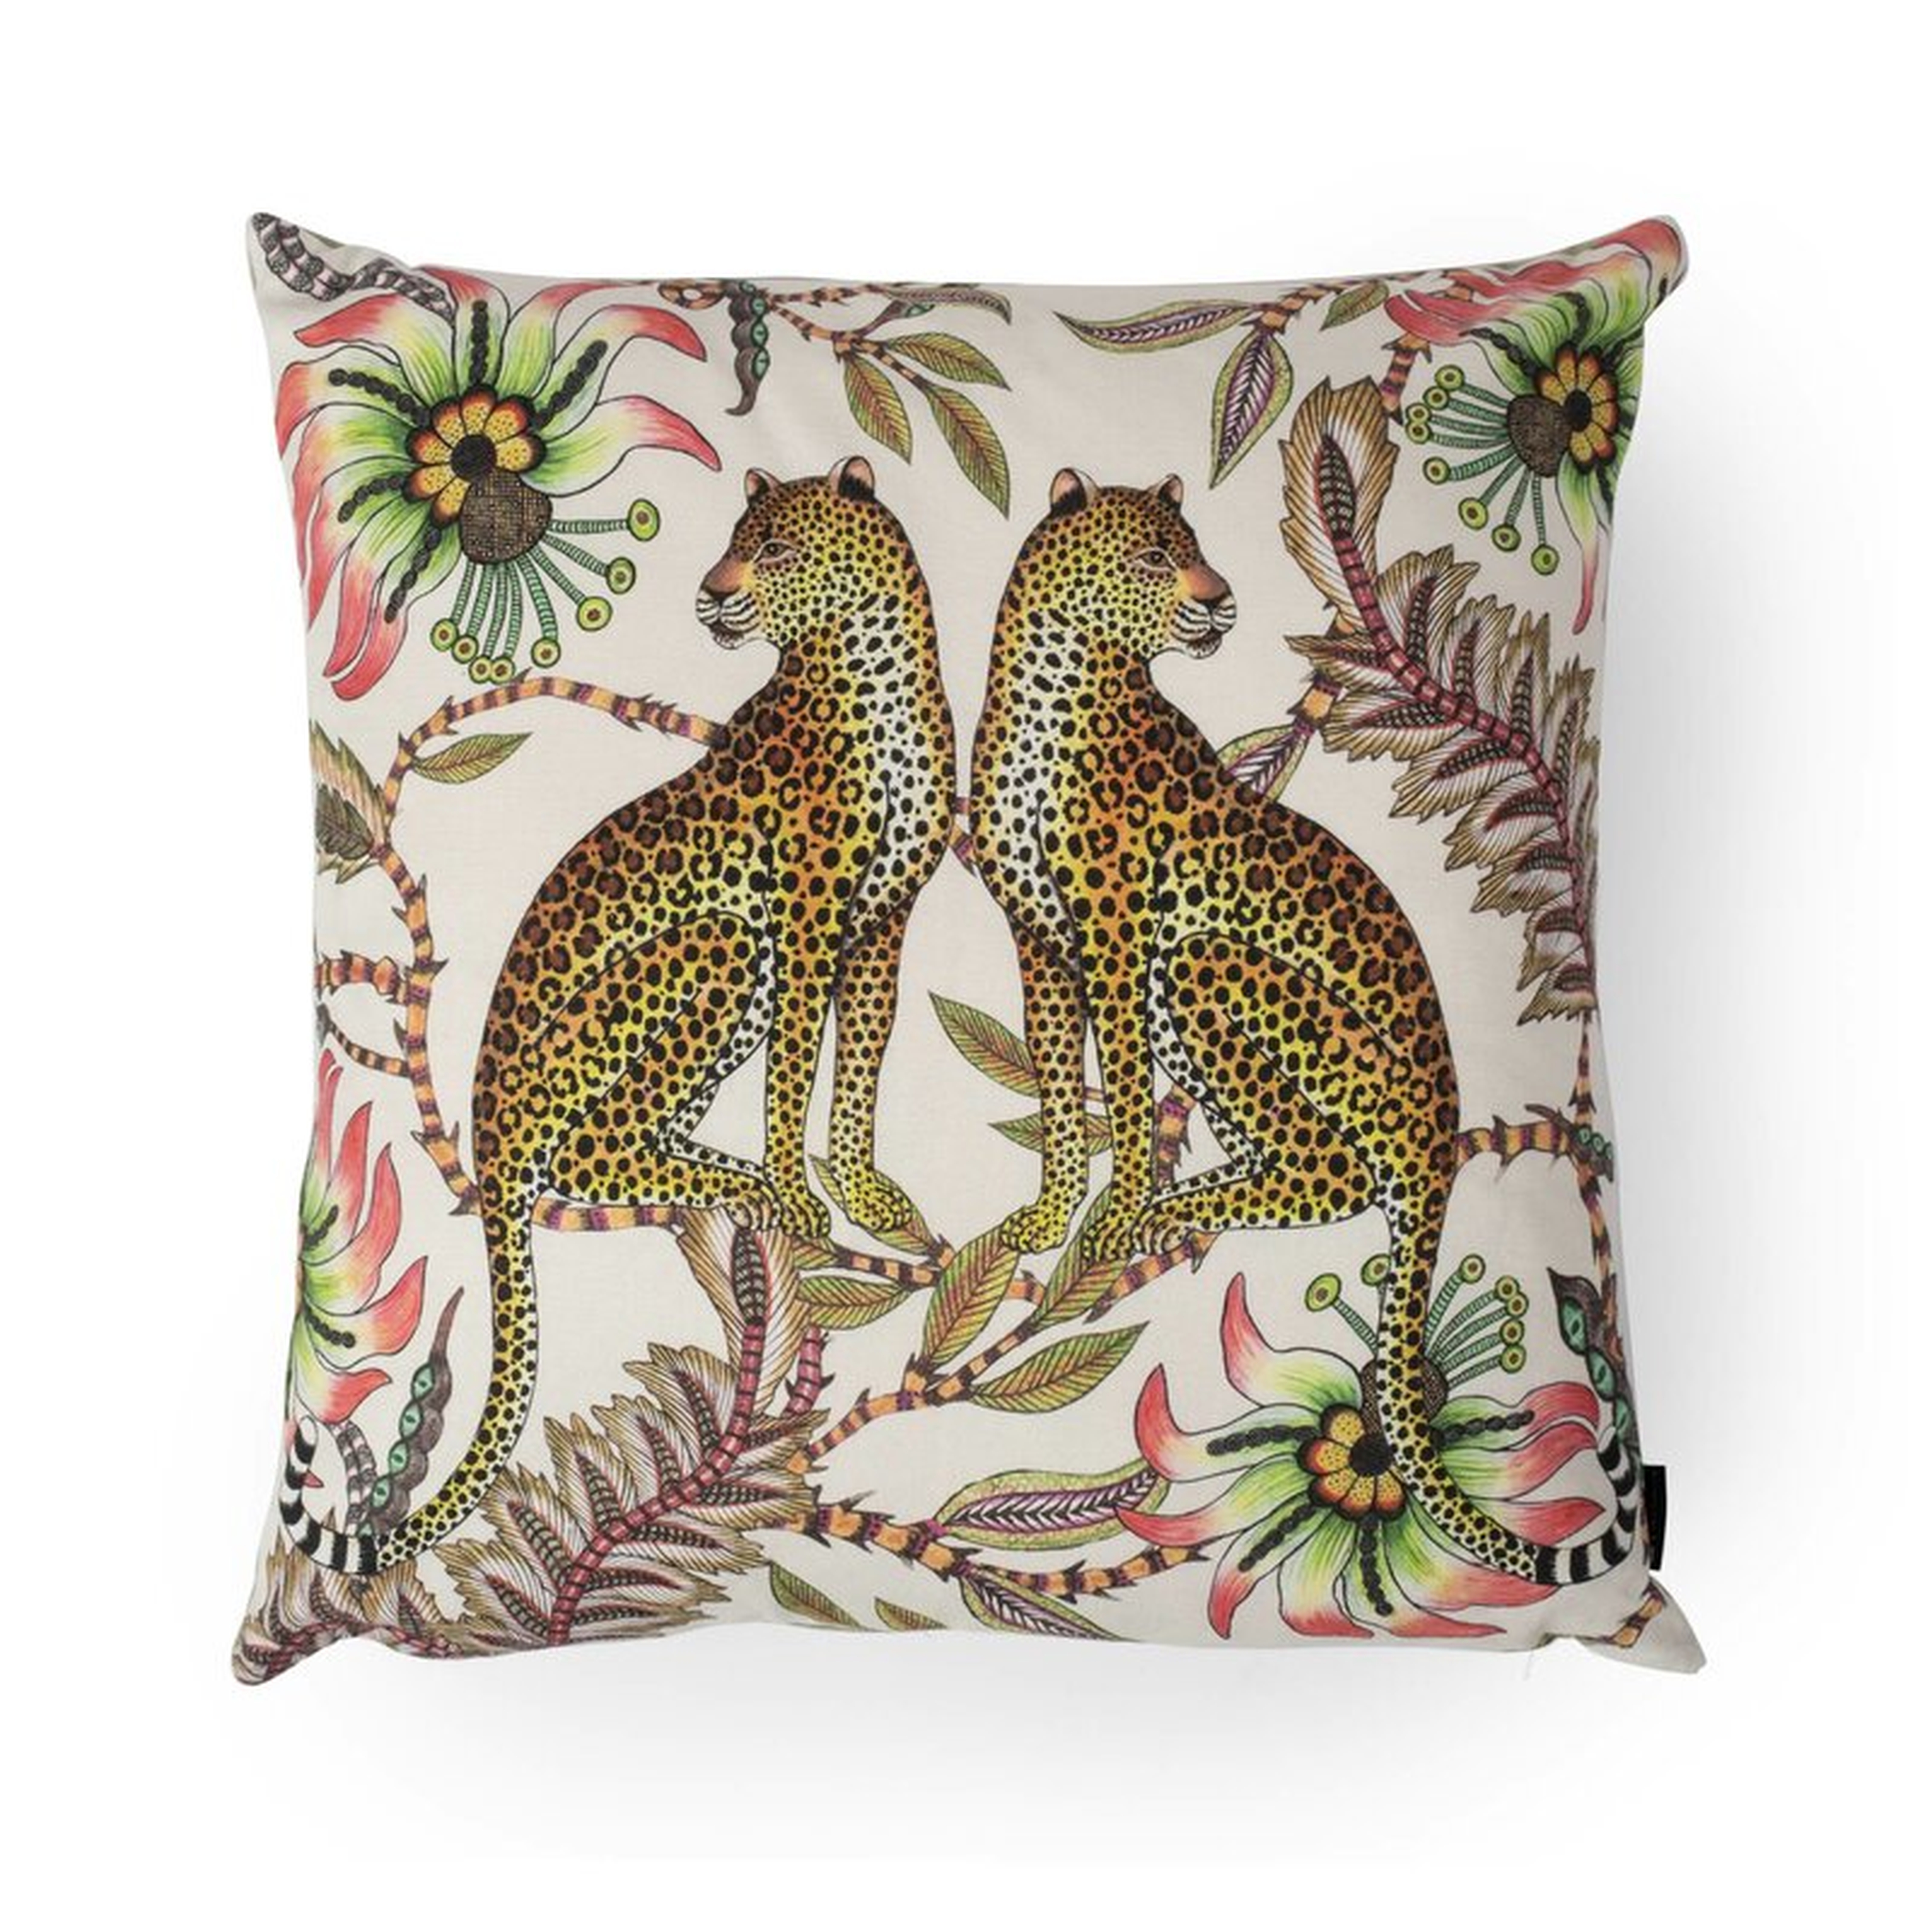 Ngala Trading Co. Lovebird Leopards Sabie Square Cotton Pillow Cover & Insert - Perigold